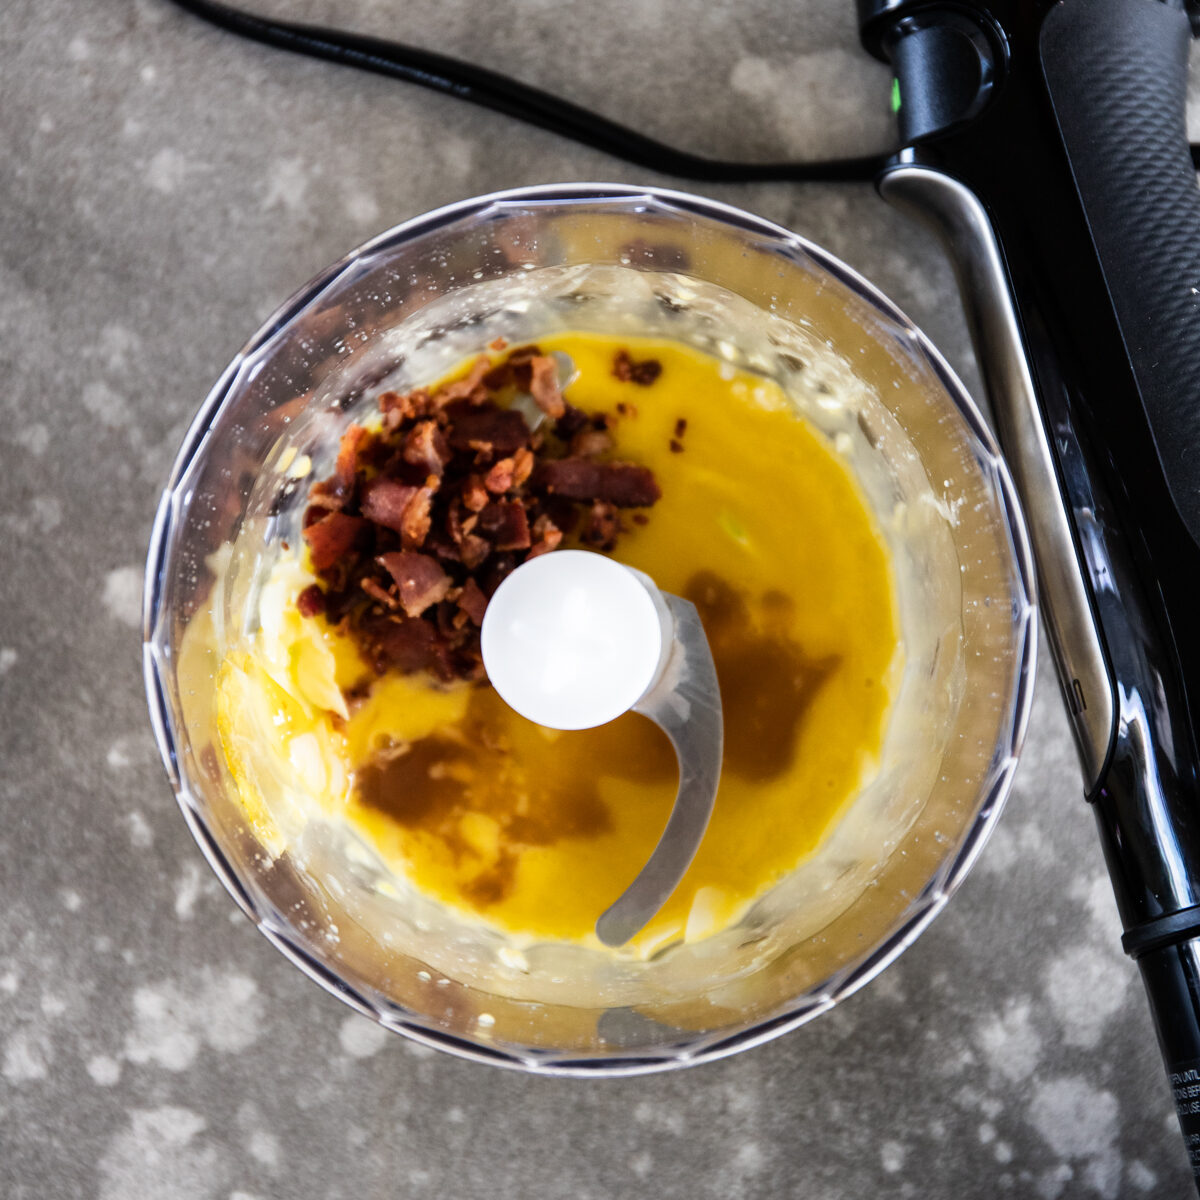 The yellow mixture has become frothy and bacon bits have been added on one side of the processor bowl.